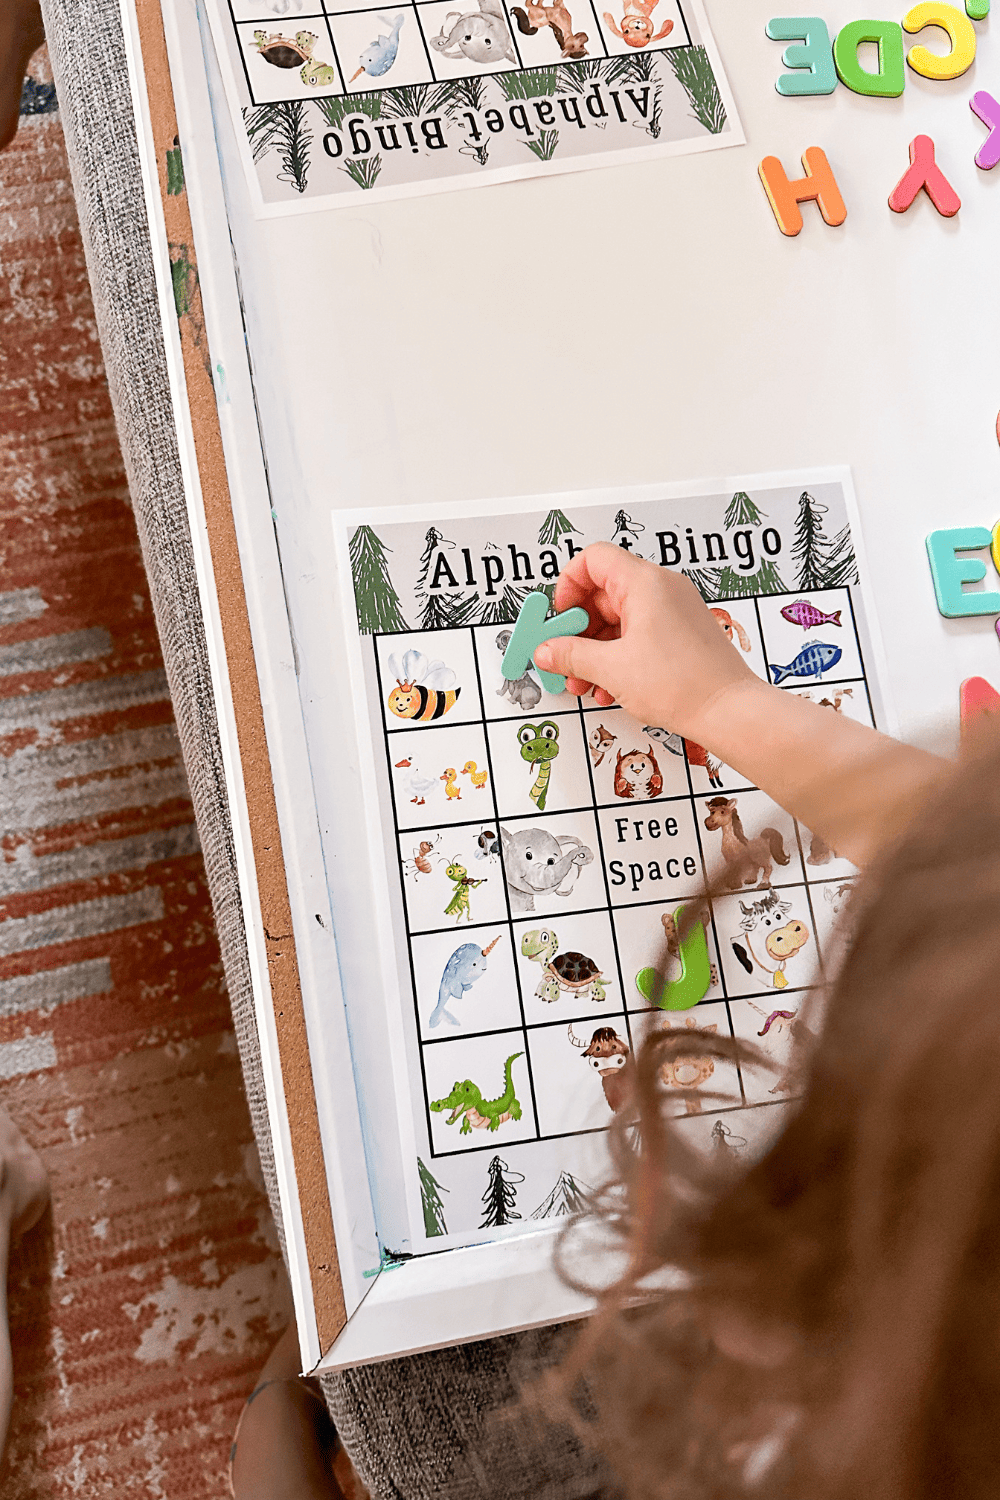 Alphabet bingo, a bingo board with a bunch of different animals. A hand placing a magnetic letter K on the board.